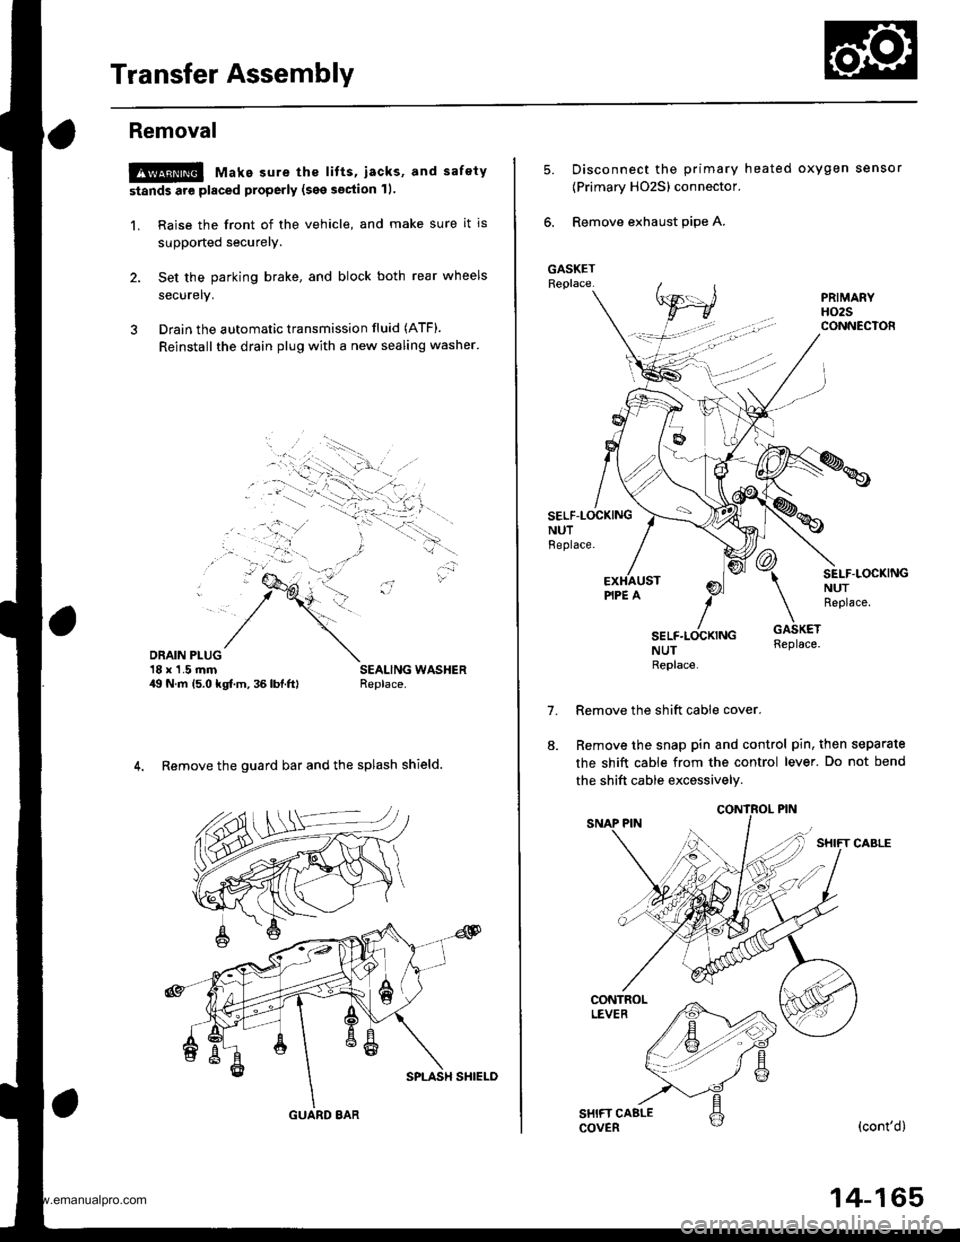 HONDA CR-V 1998 RD1-RD3 / 1.G Workshop Manual 
Transfer Assembly
Removal
@ Make sure the lifts, iacks, and safety
stands are placed properly (see section 11.
1. Raise the front of the vehicle, and make sure it is
supported securely.
2. Set the pa